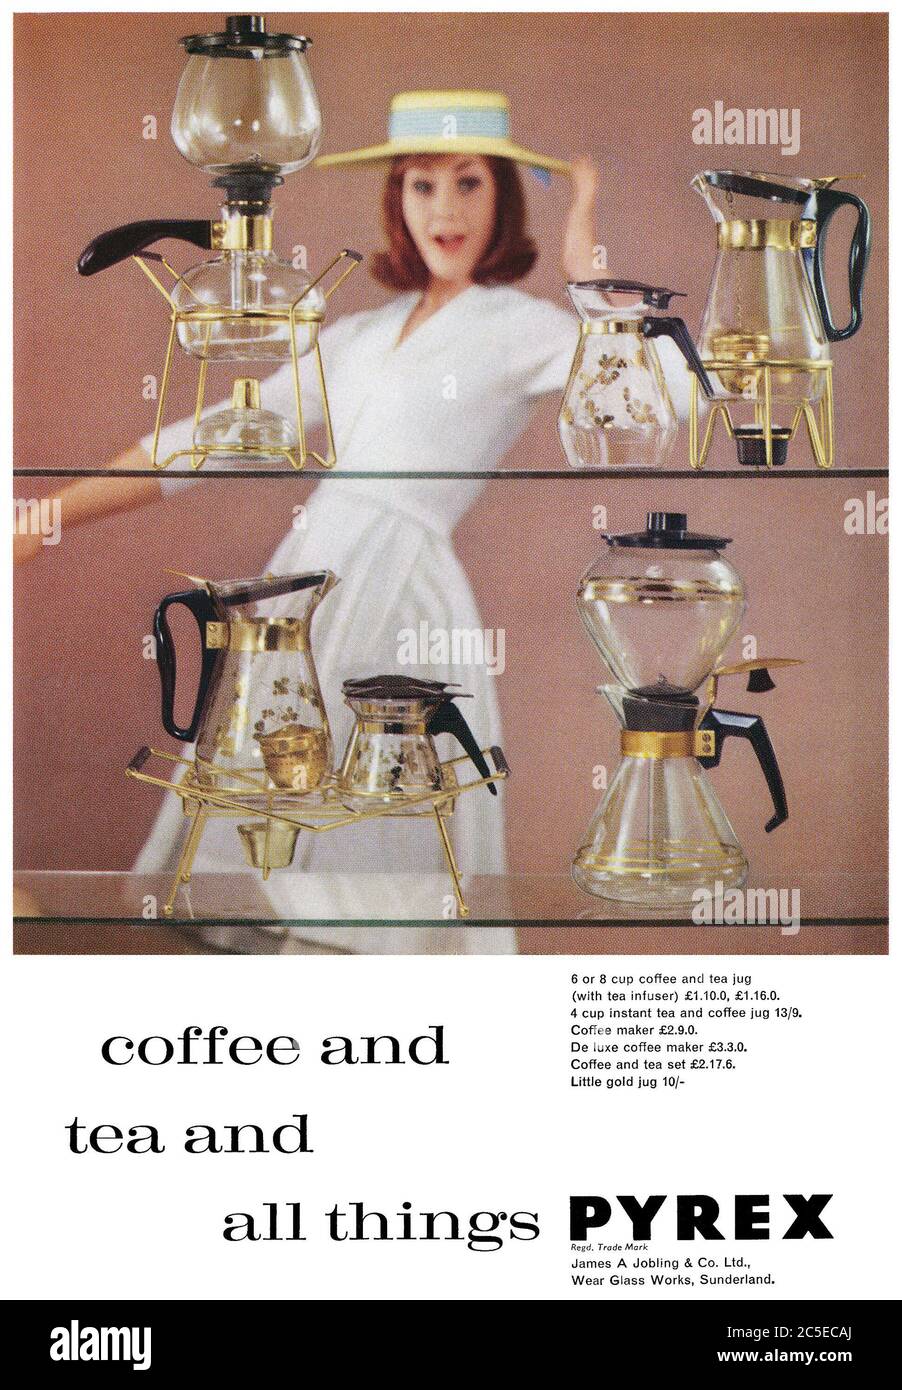 1960 British advertisement for Pyrex coffee and tea jugs and coffee makers  Stock Photo - Alamy